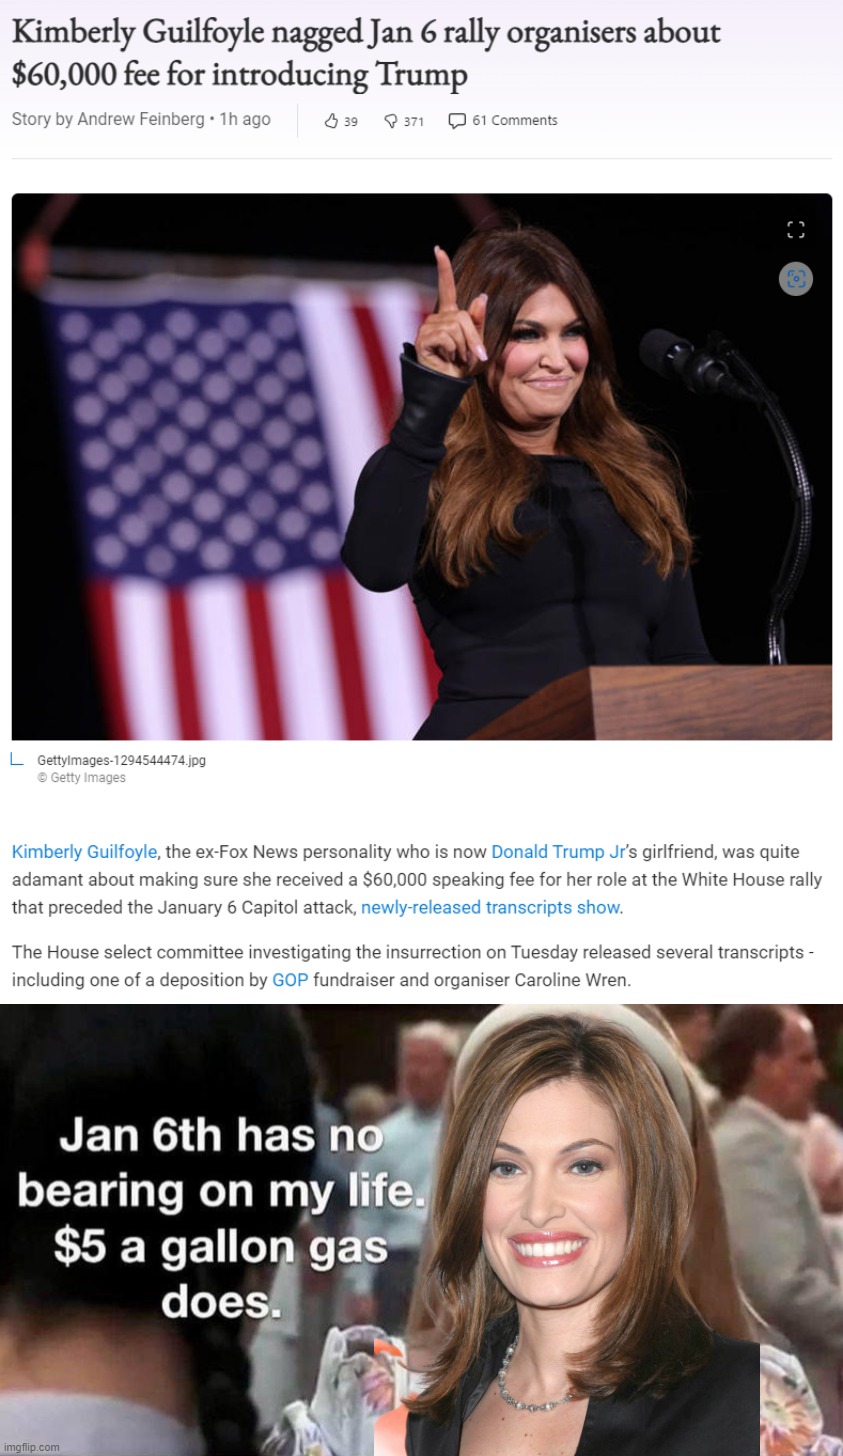 $60,000 to introduce one traitor to another mob of traitors is nice work if you can get it! Hey, everyone's gotta eat! | image tagged in kimberly guilfoyle jan 6 speech nag,jan 6th has no bearing on my life,jan 6,traitor,traitors,treason | made w/ Imgflip meme maker